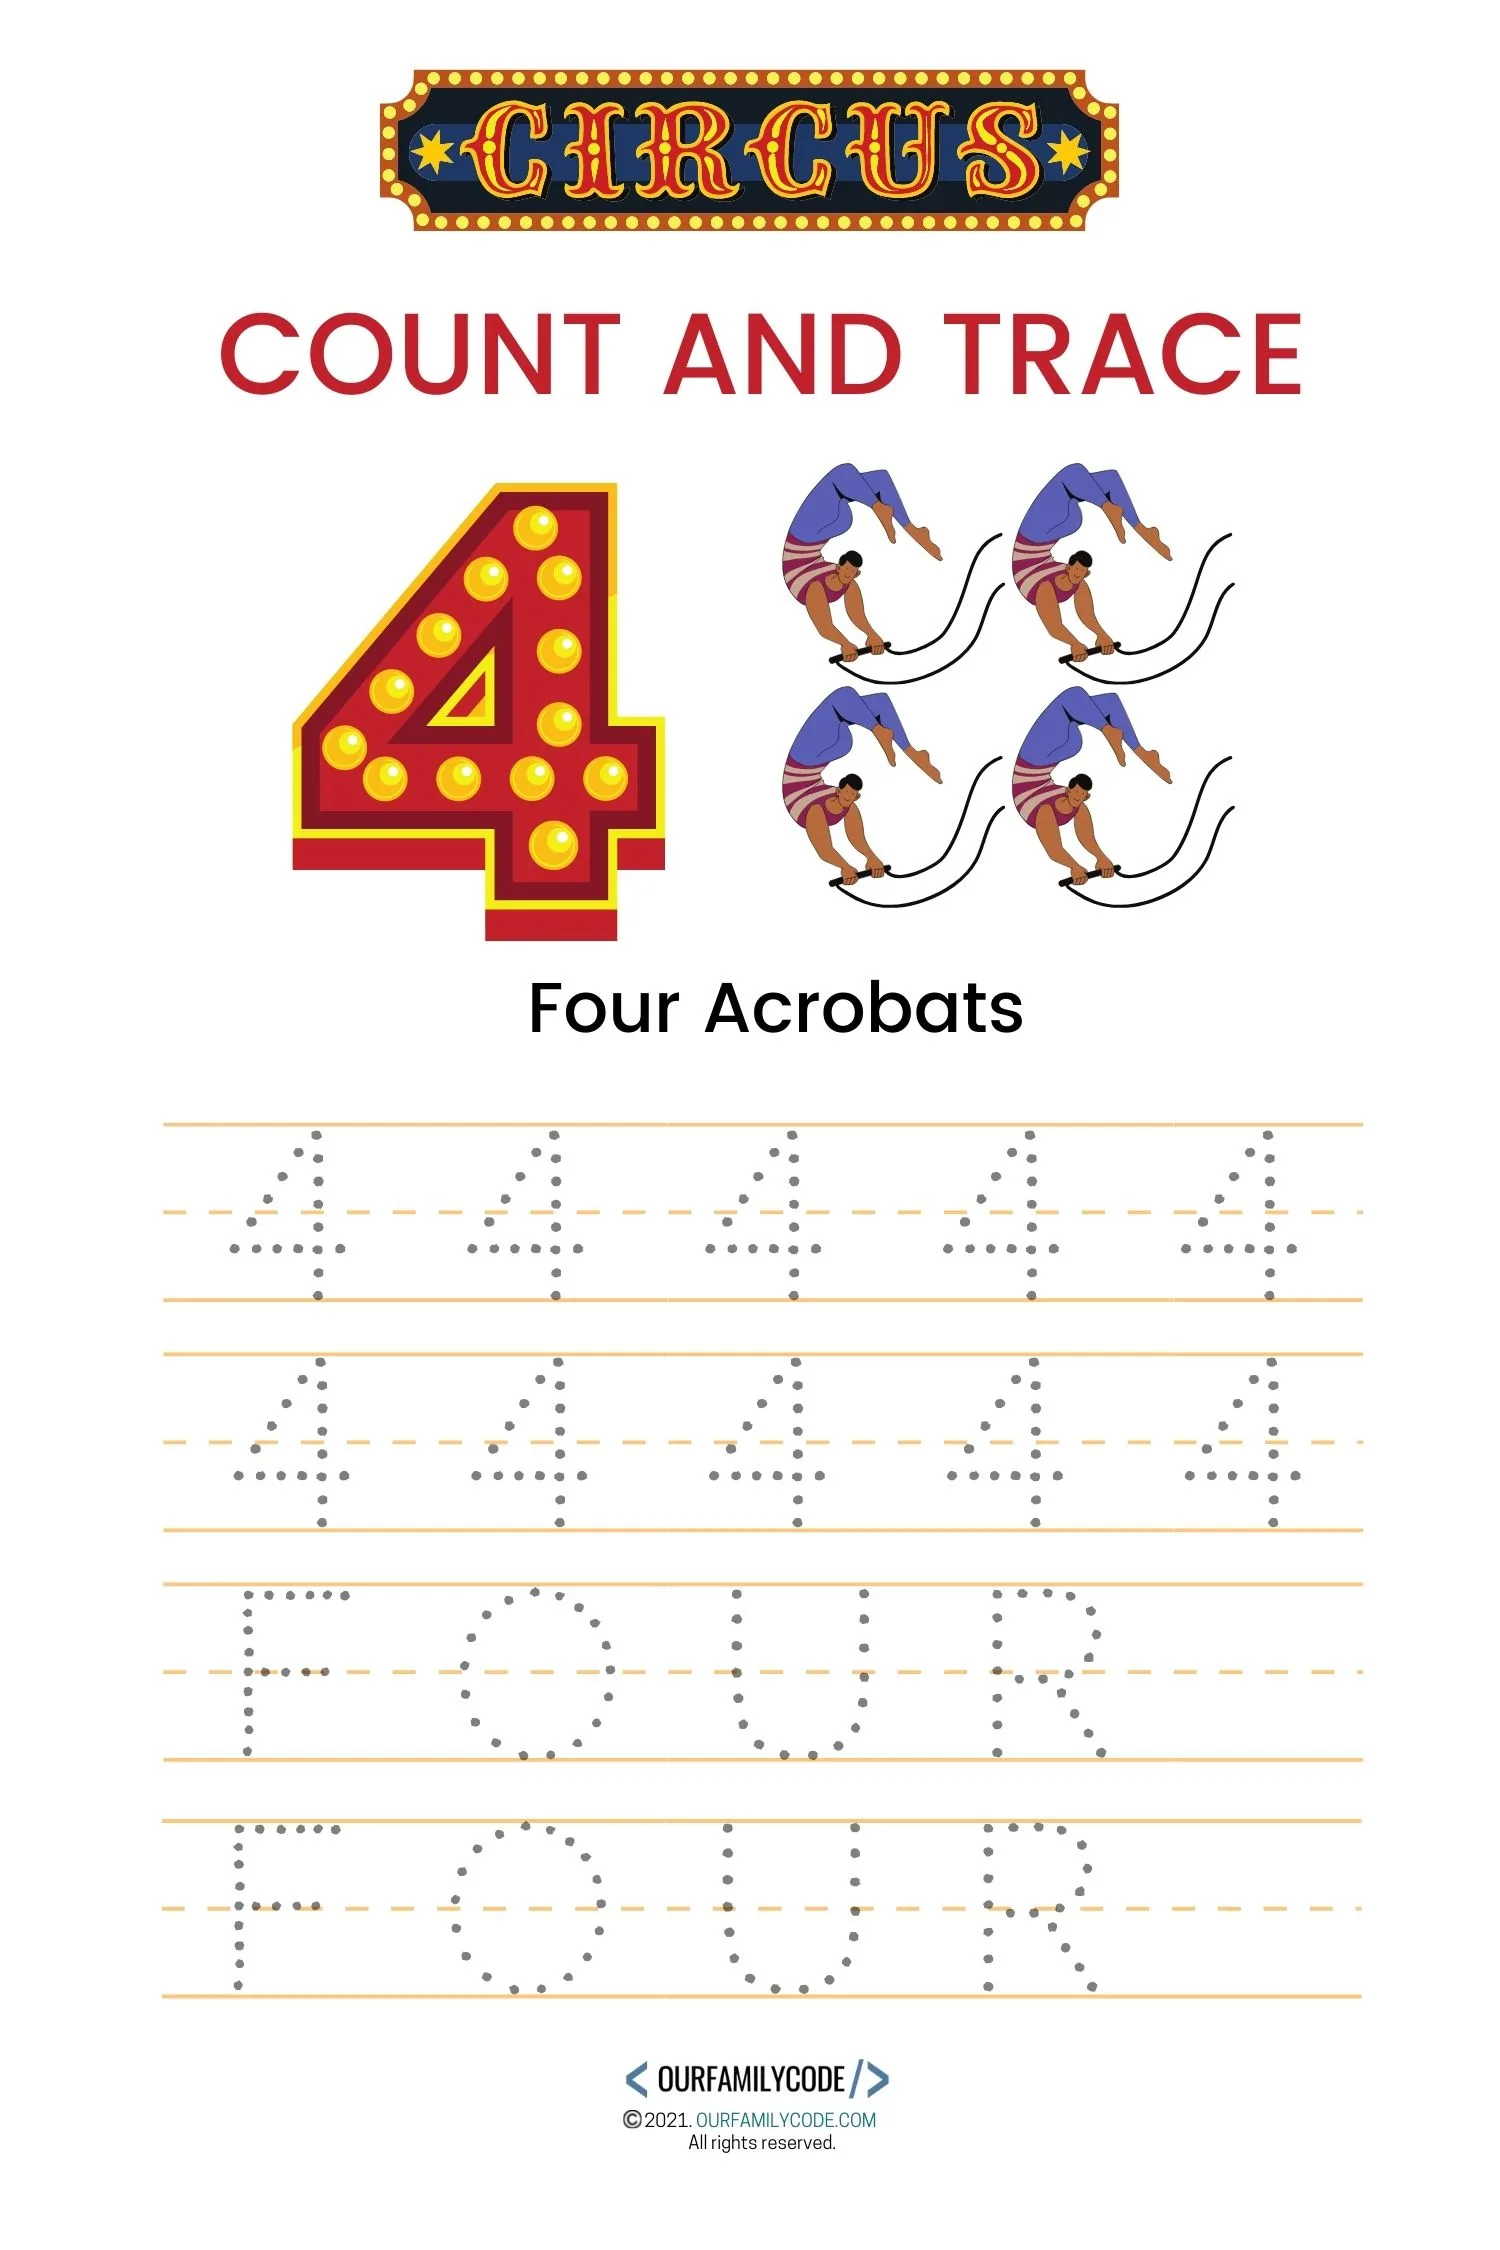 four acrobats count and trace number 4 worksheets